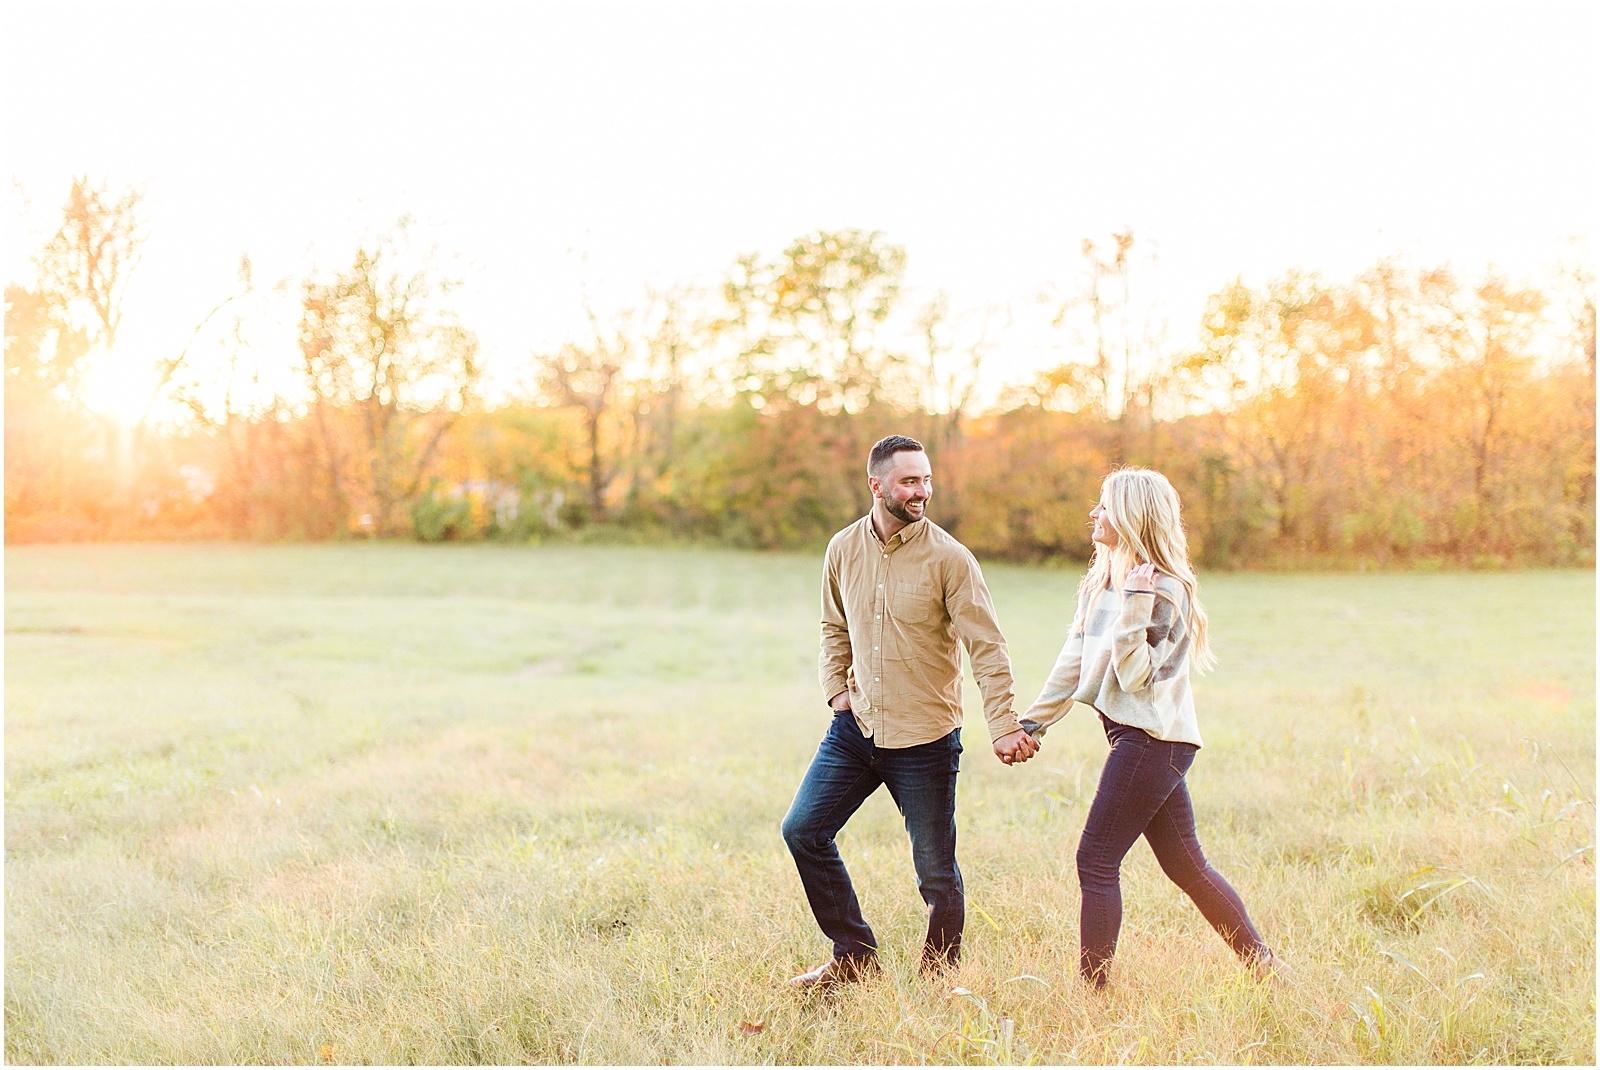 A Southern Indiana Engagement Session | Charleston and Erin | Bret and Brandie Photography044.jpg